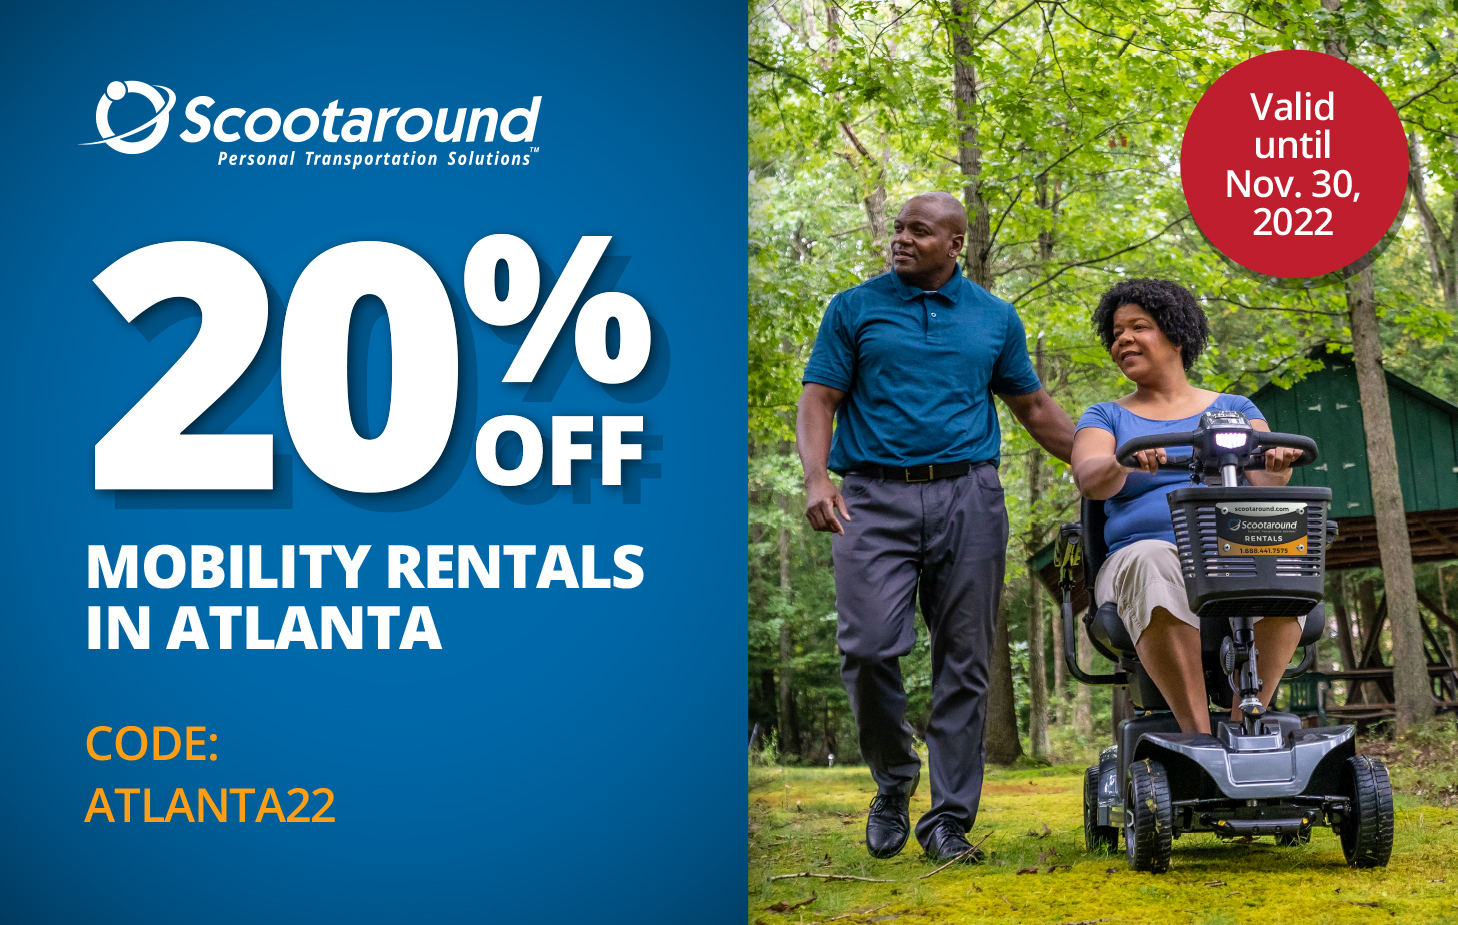 Save 20% on Mobility Rentals in Atlanta